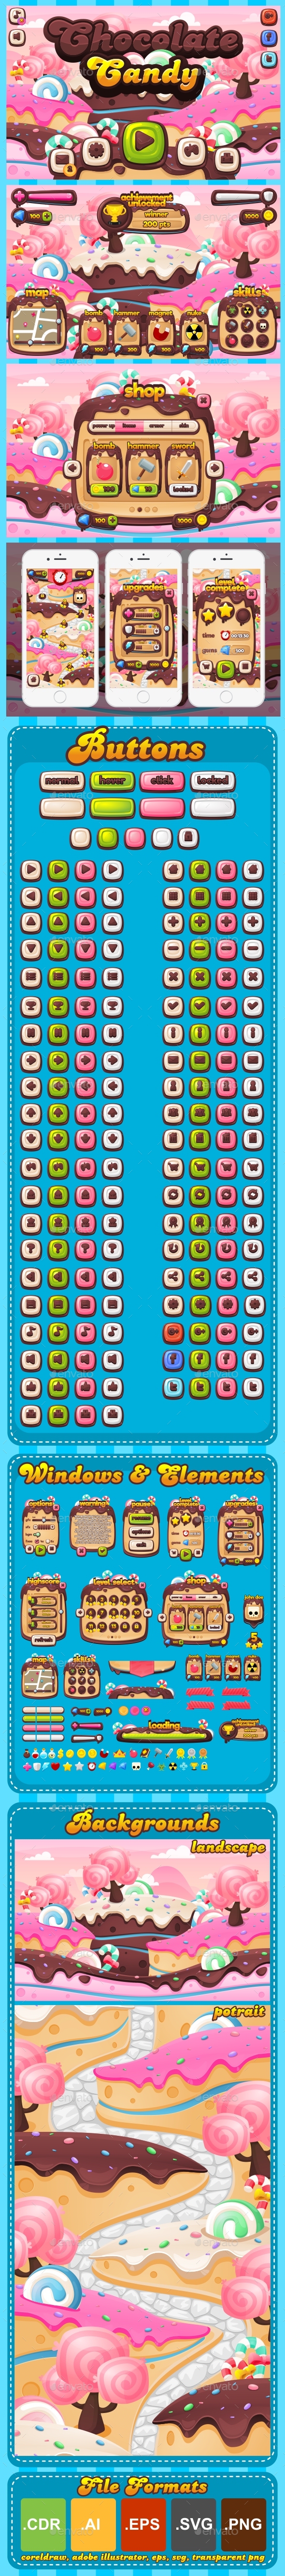 GraphicRiver Chocolate Candy Game GUI 21025507